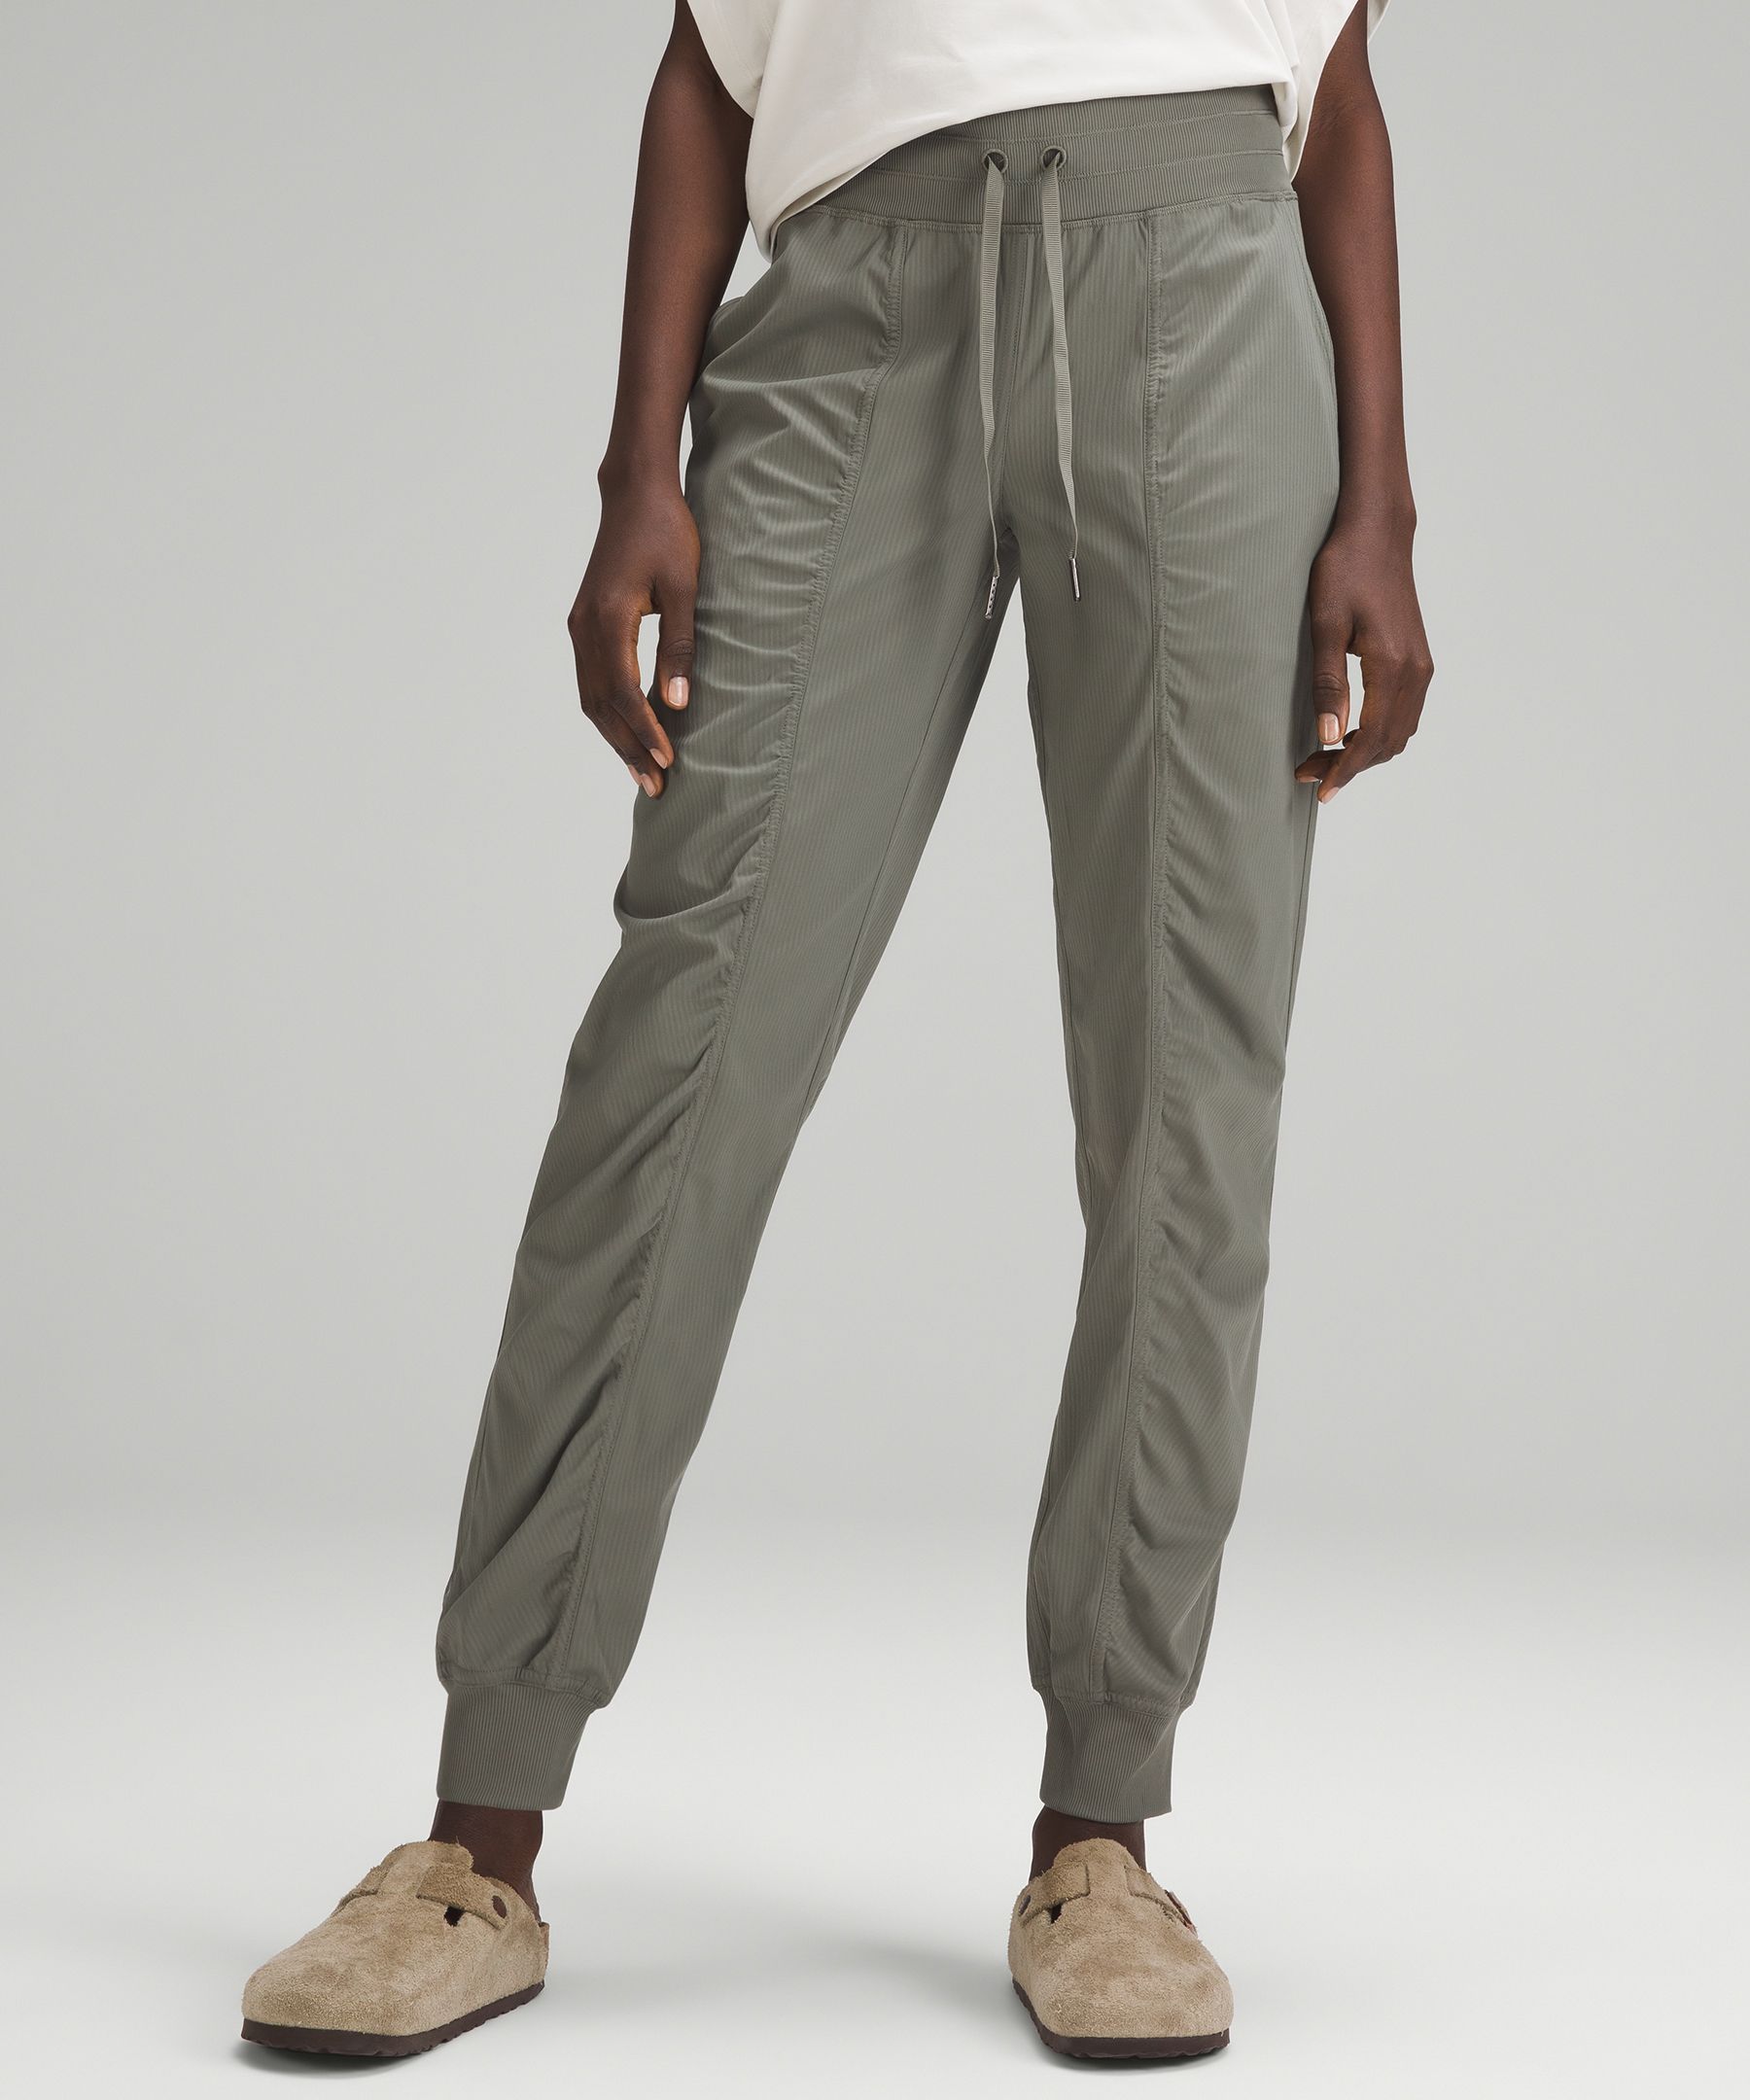 Effortless. Everywhere. On-trend. The Sage Jogger is made from